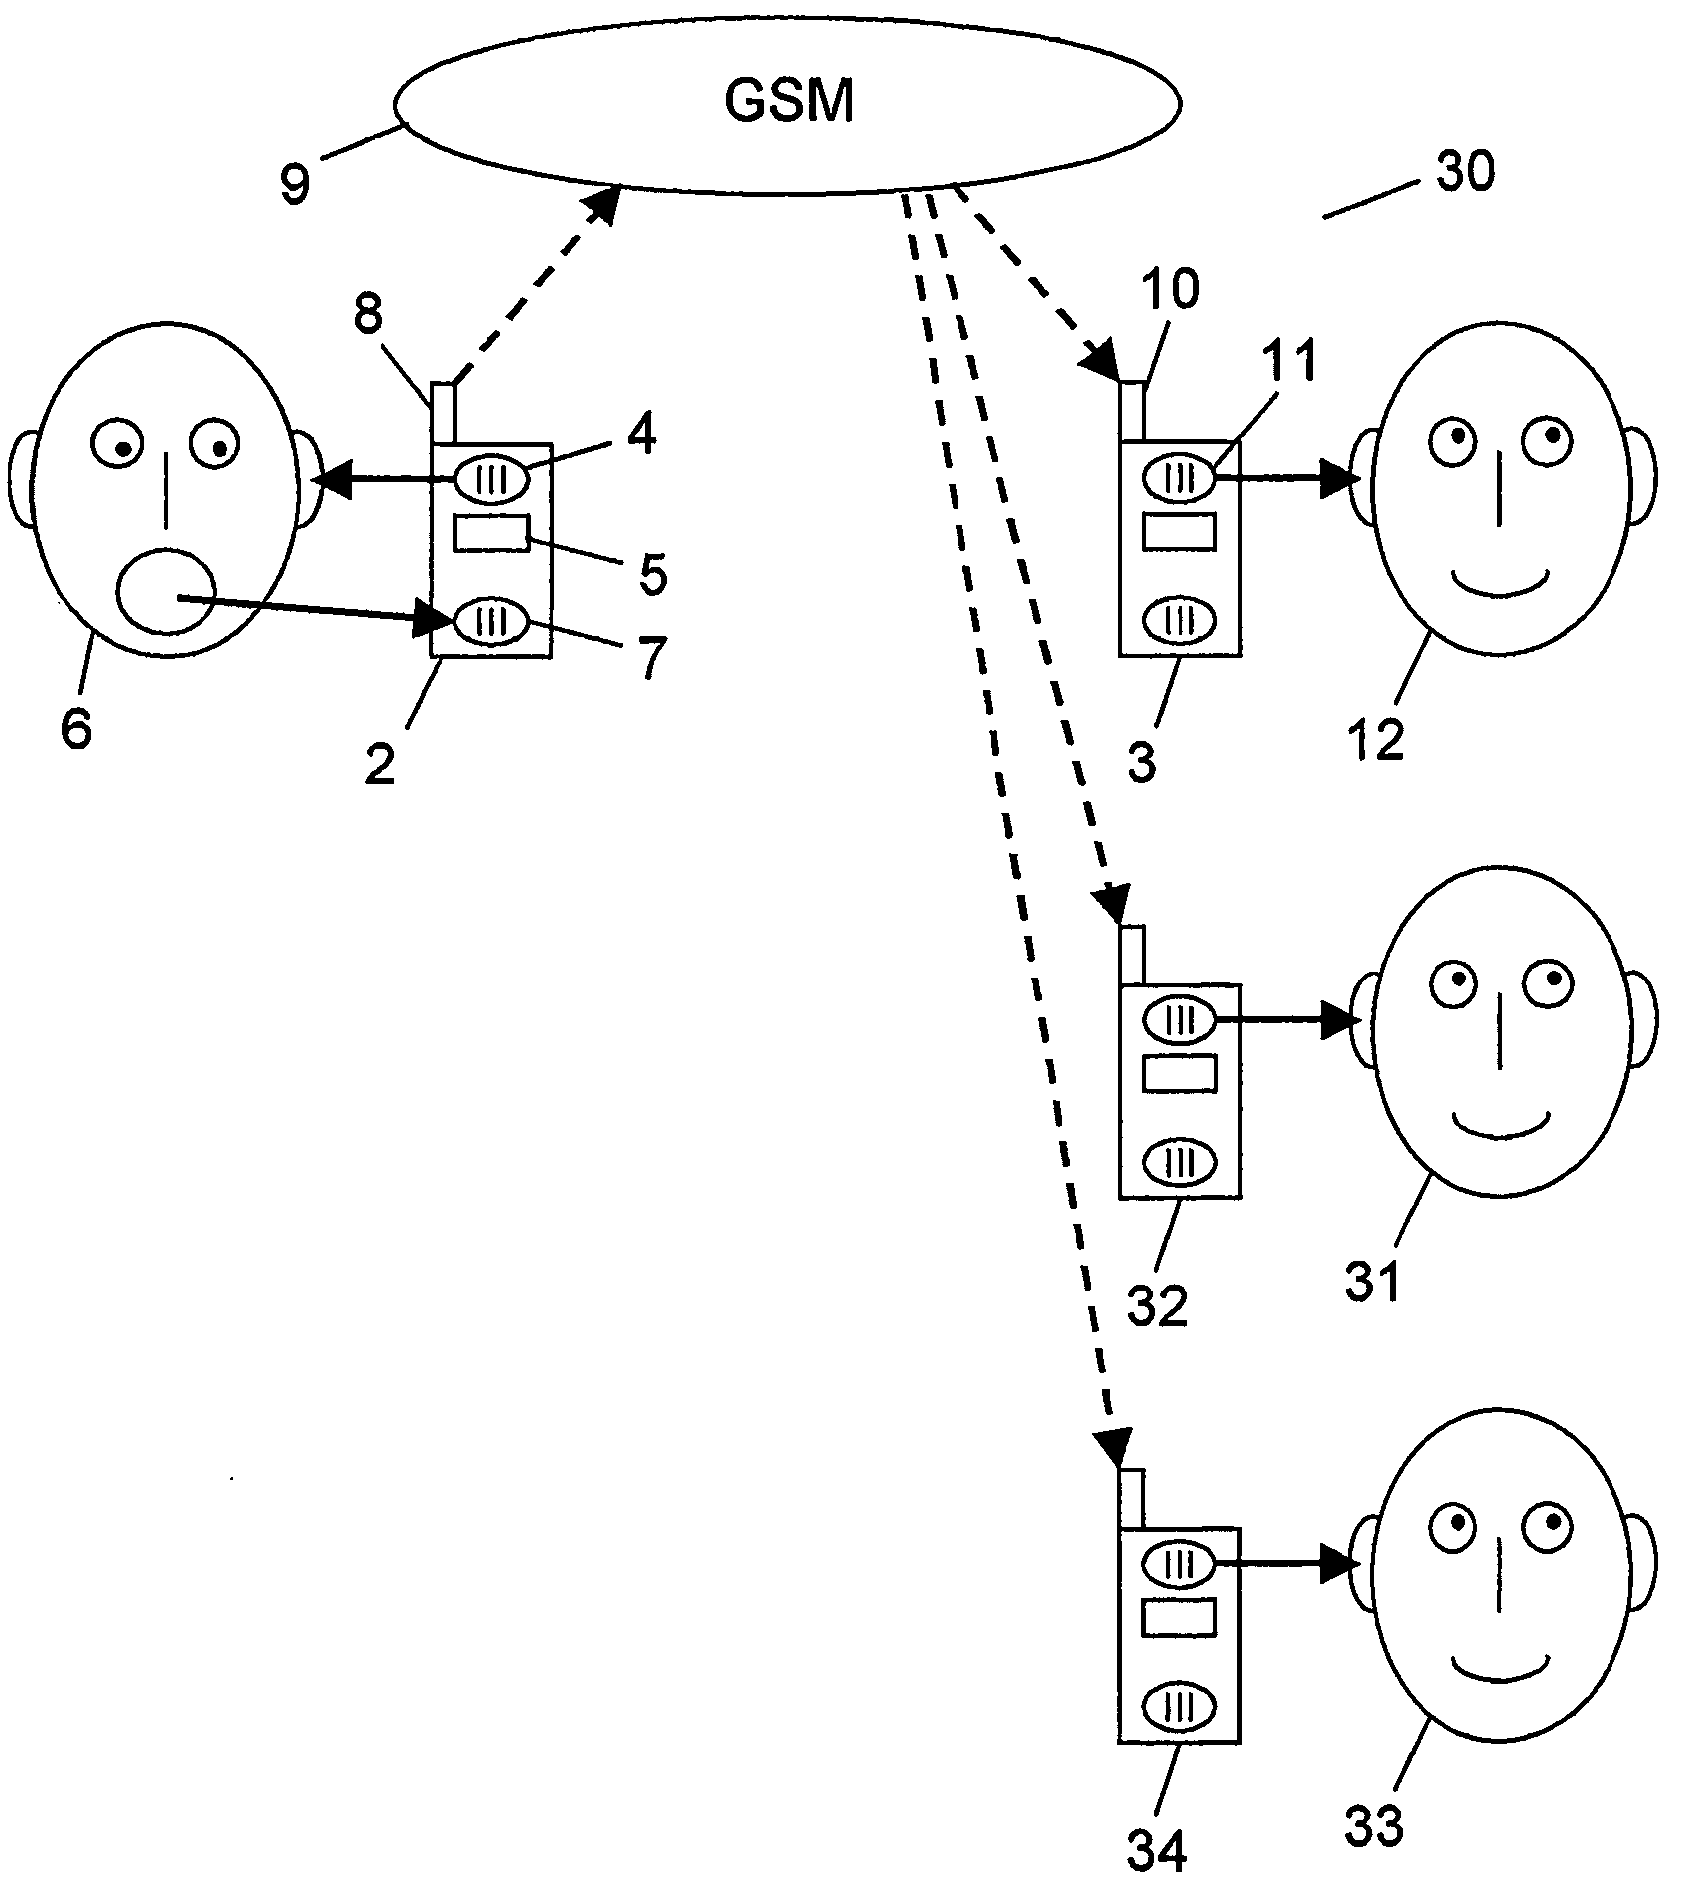 Electronic communications device with a karaoke function